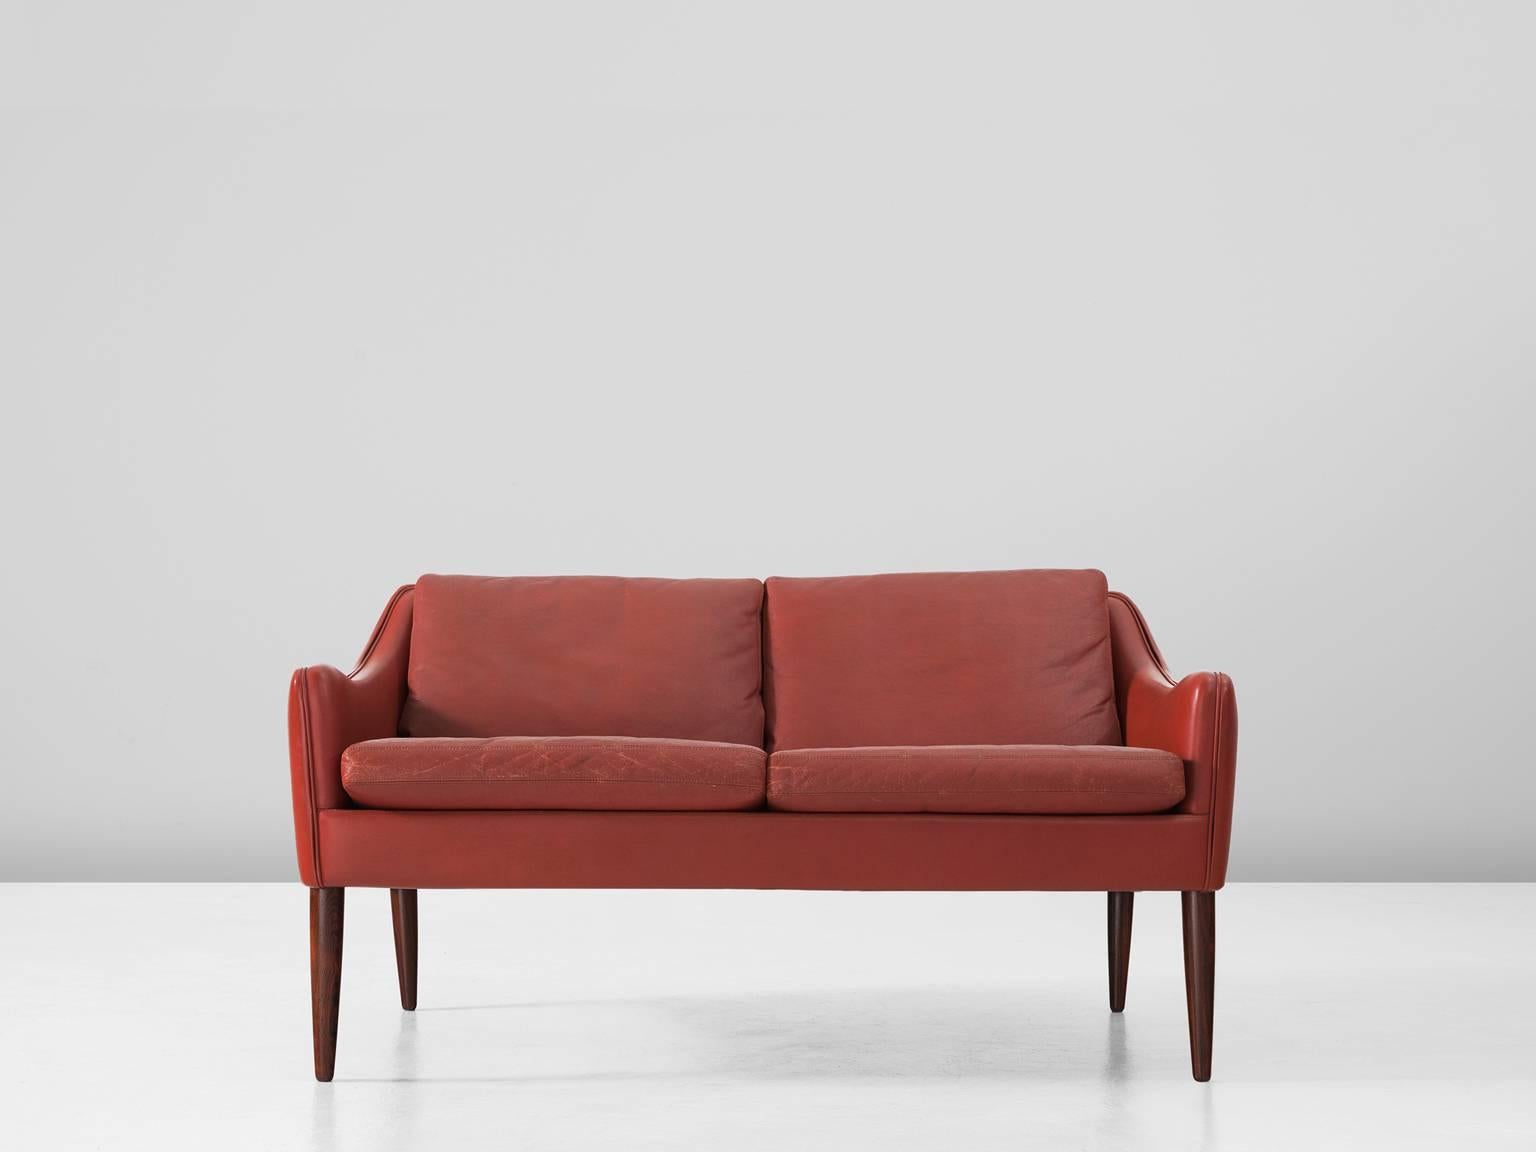 Living room set in rosewood and leather by Hans Olsen for CS Møbler, Denmark before 1963.

Red leather settee by Danish designer Hans Olsen. This sofa shows interesting lines, which create an open look. The four high cylindrical legs are tapered.